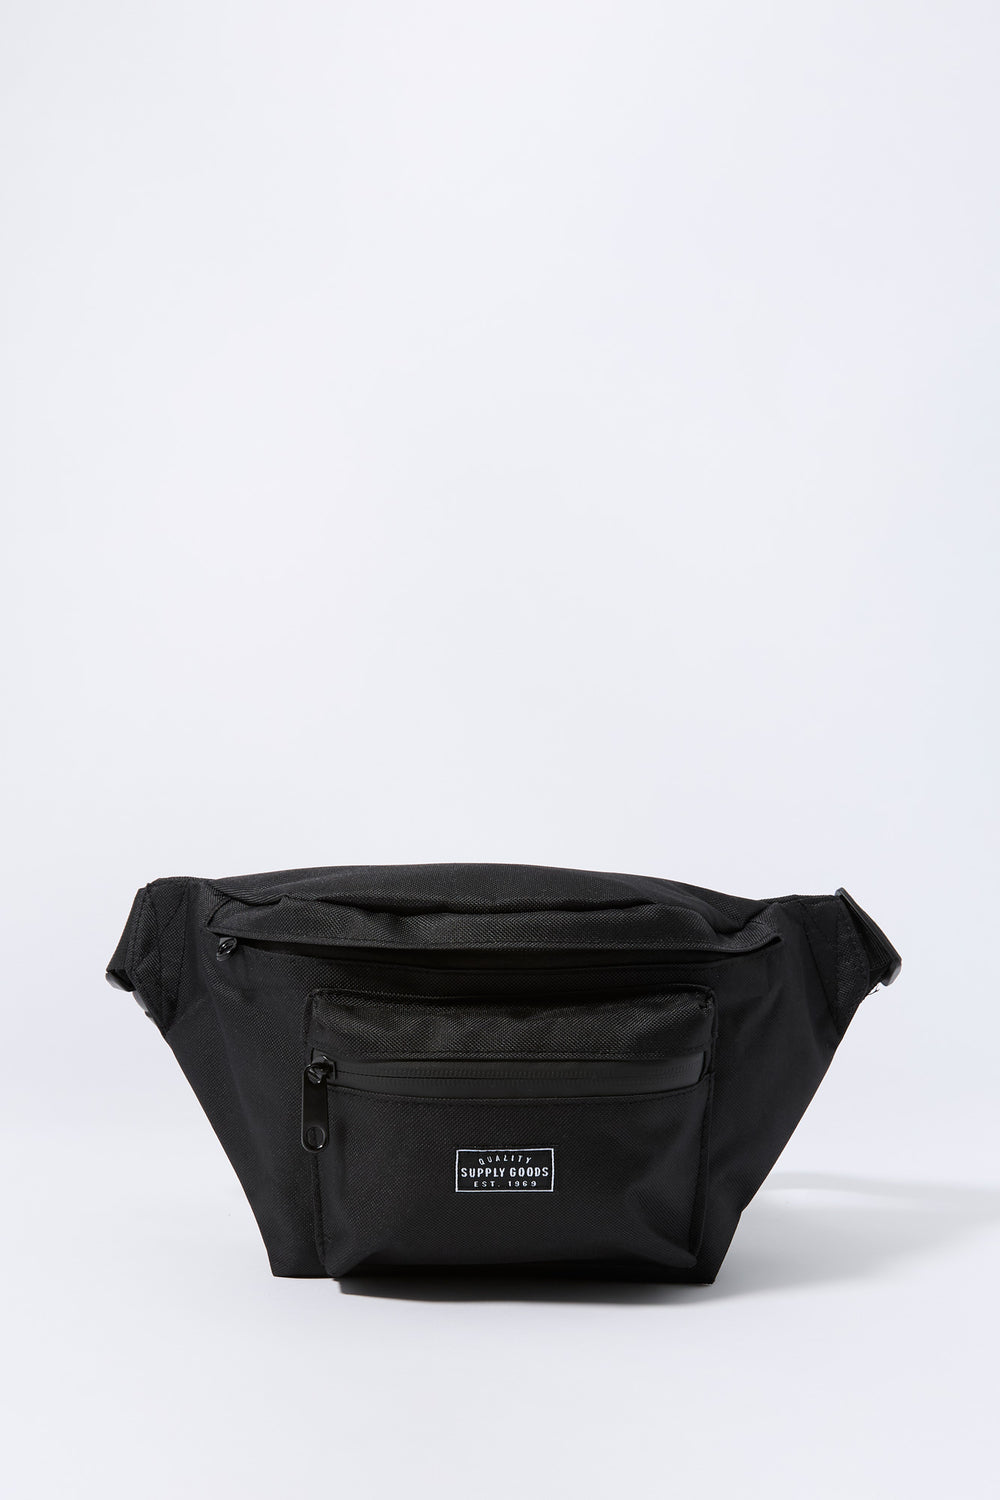 Supply Goods Patch Fanny Pack Supply Goods Patch Fanny Pack 1